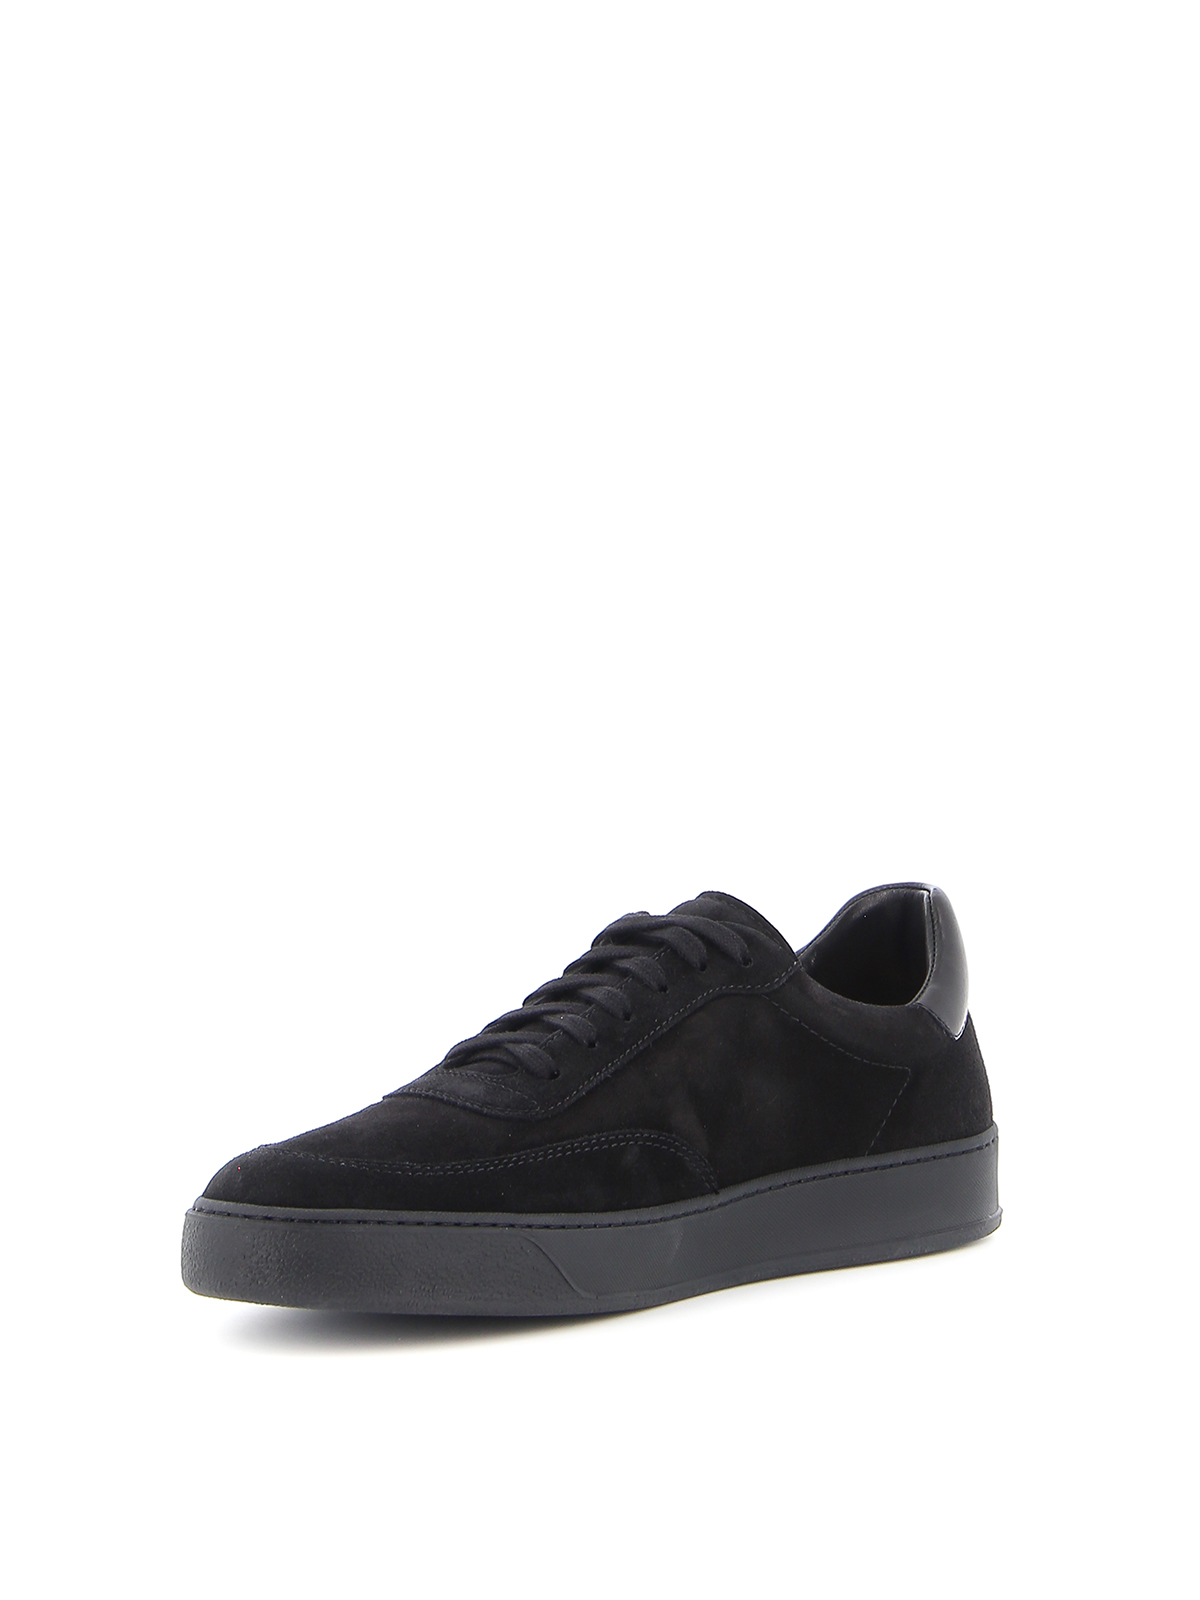 Trainers Henderson - Mitch sneakers - MITCHBLACK | Shop online at iKRIX